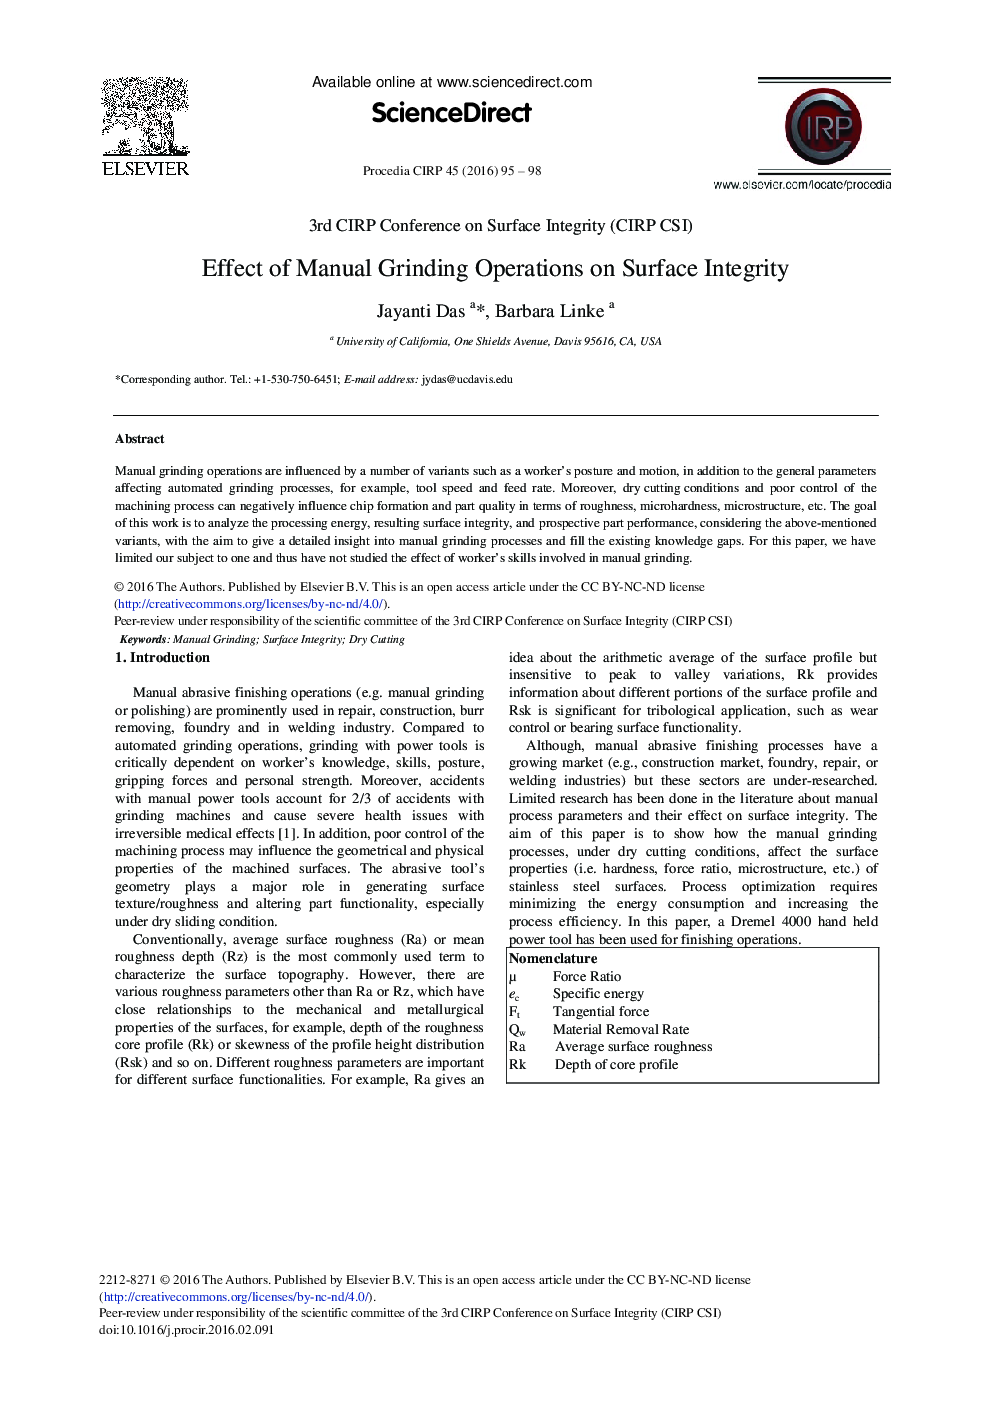 Effect of Manual Grinding Operations on Surface Integrity 